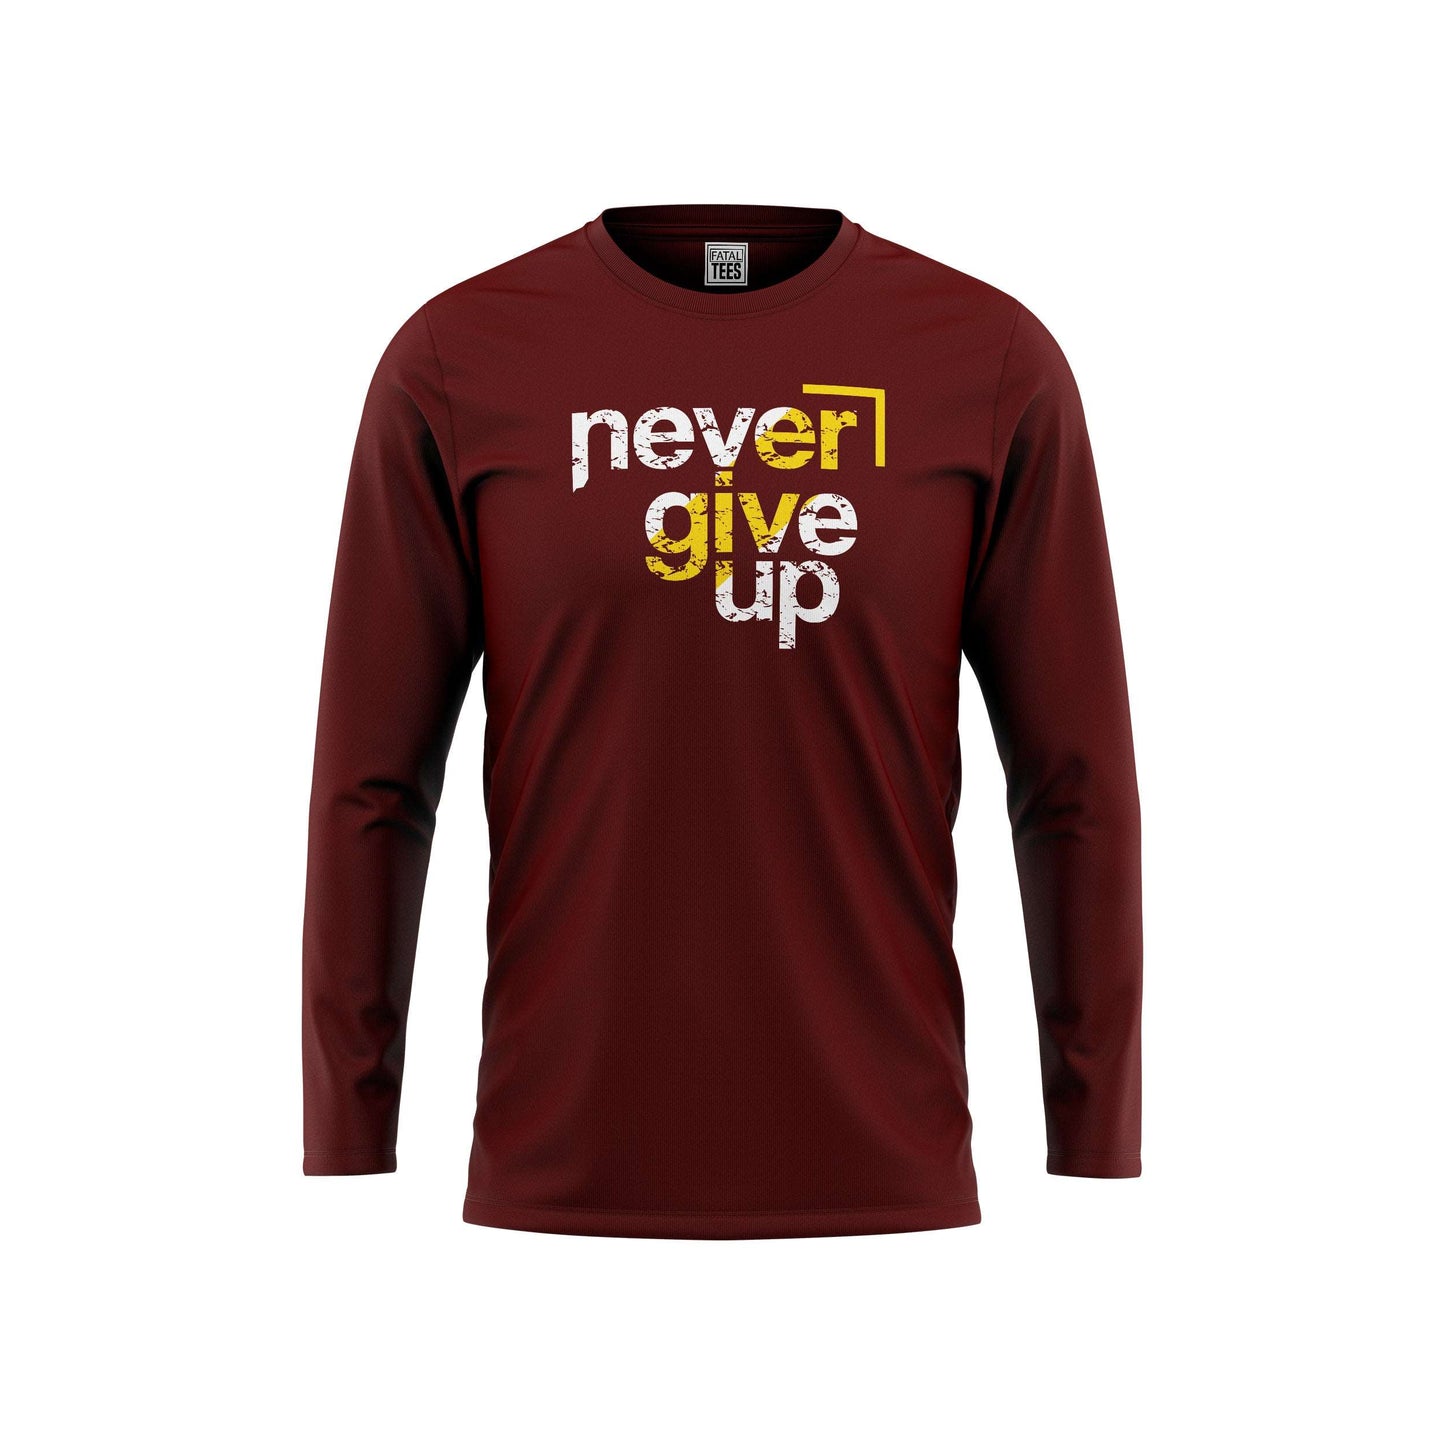 Never Give Up Tees Fatal Tees